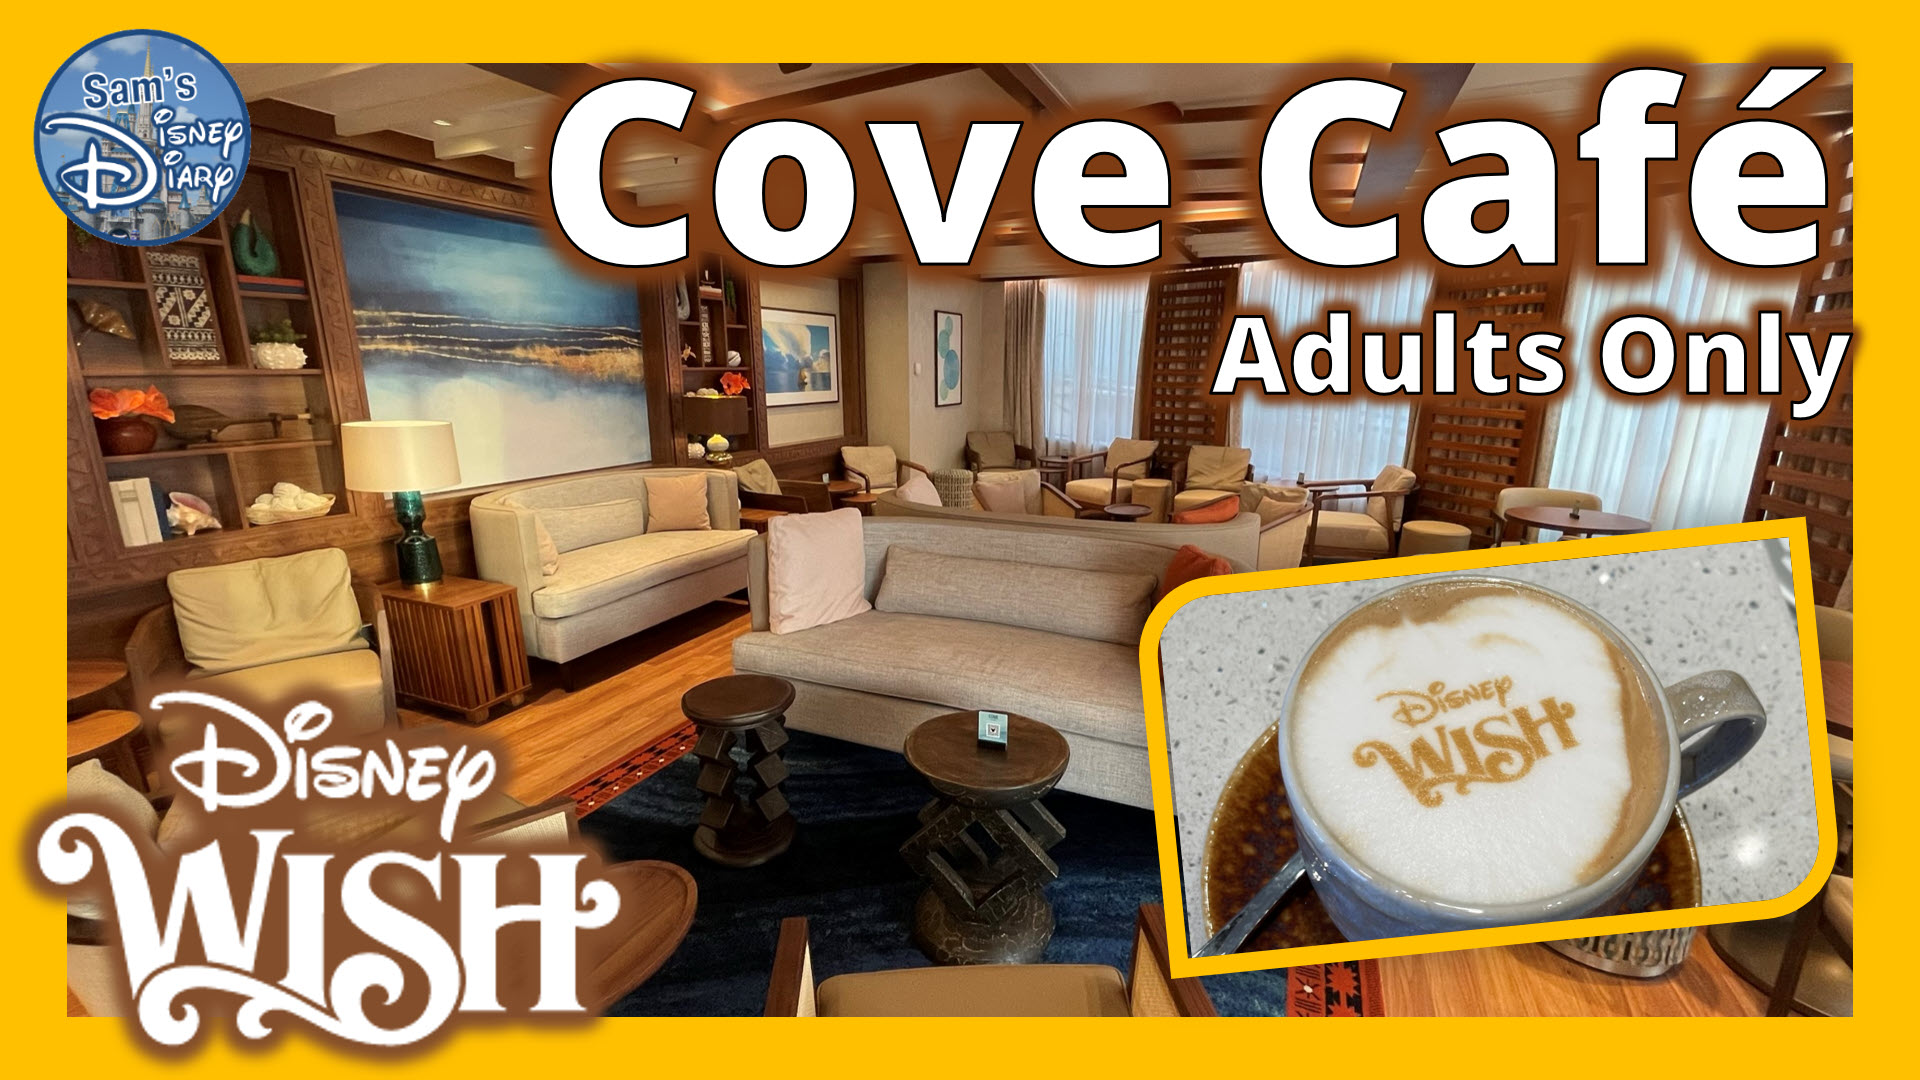 Disney Wishes and Adult Spaces - Quite Cove Cafe and Cove Cafe